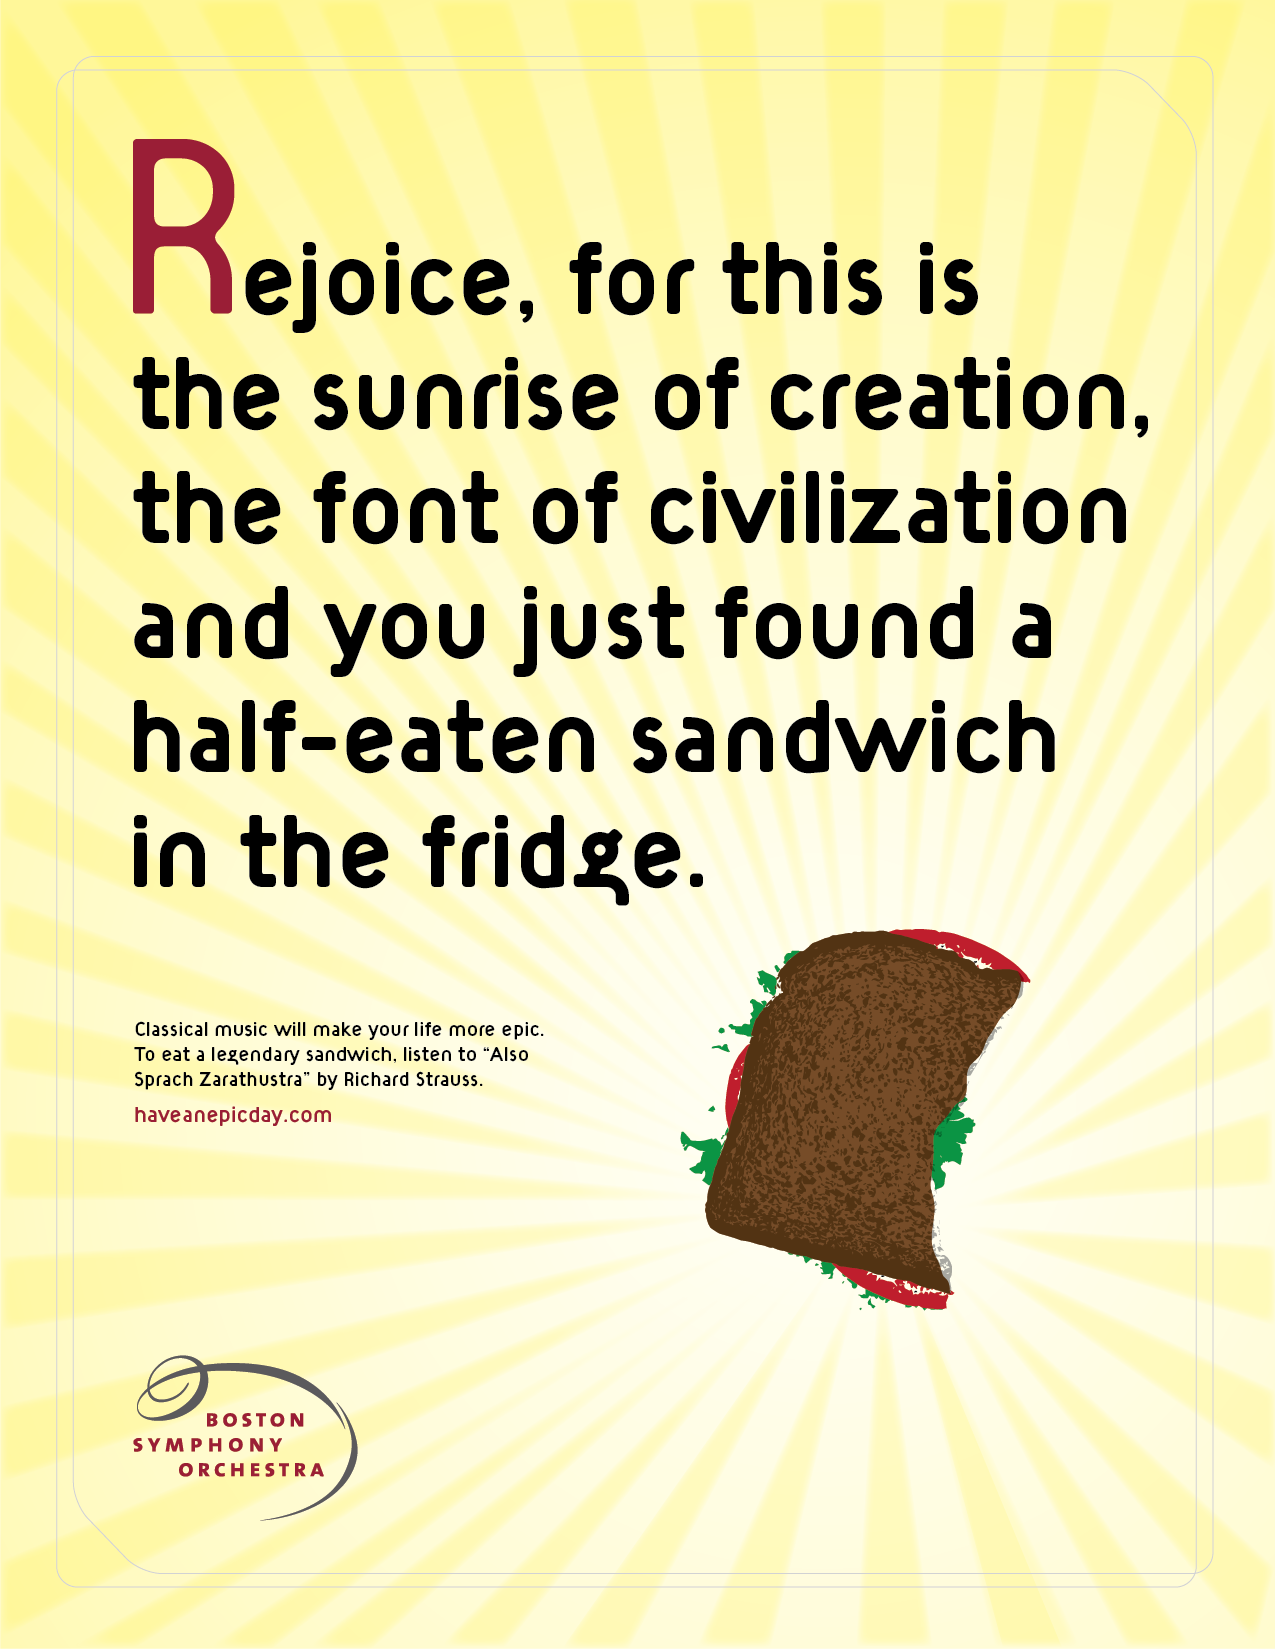 BSO-epic-illuminated-sandwich-v3.png